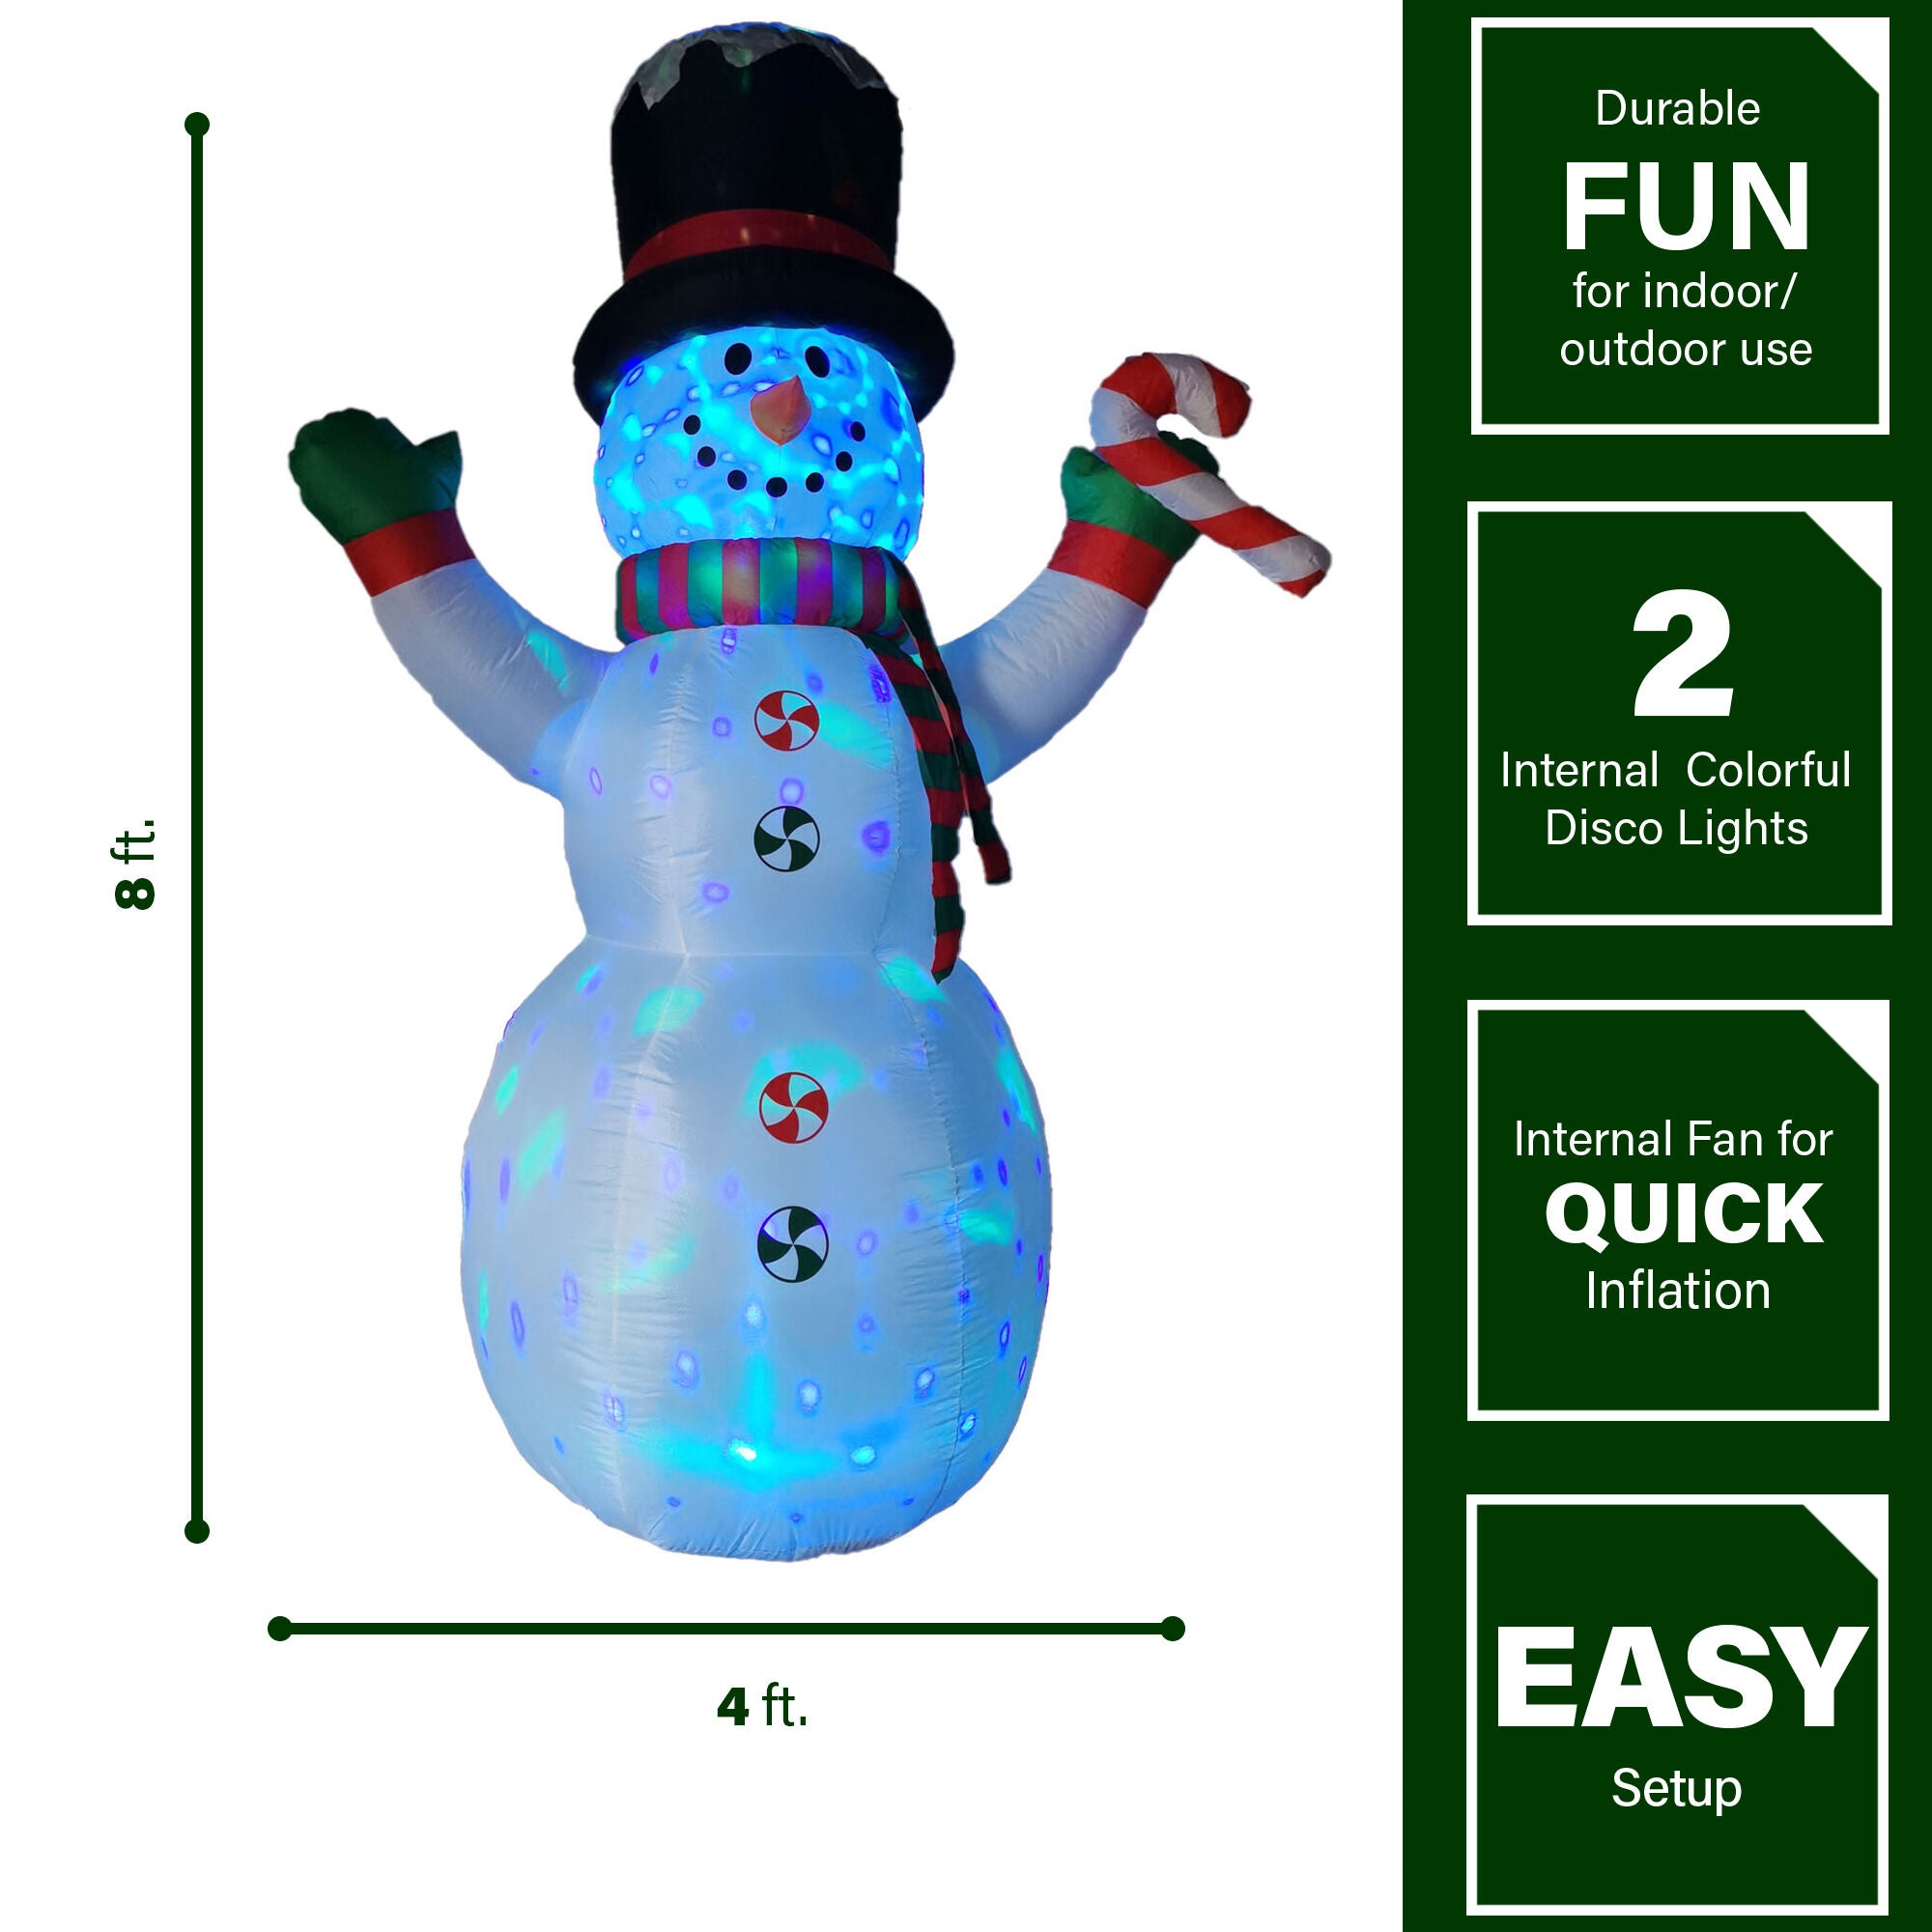 Fraser Hill Farm -  8-Ft. Pre-Lit Multi-Color inflatable Snowman with Peppermint Buttons and Candy Cane